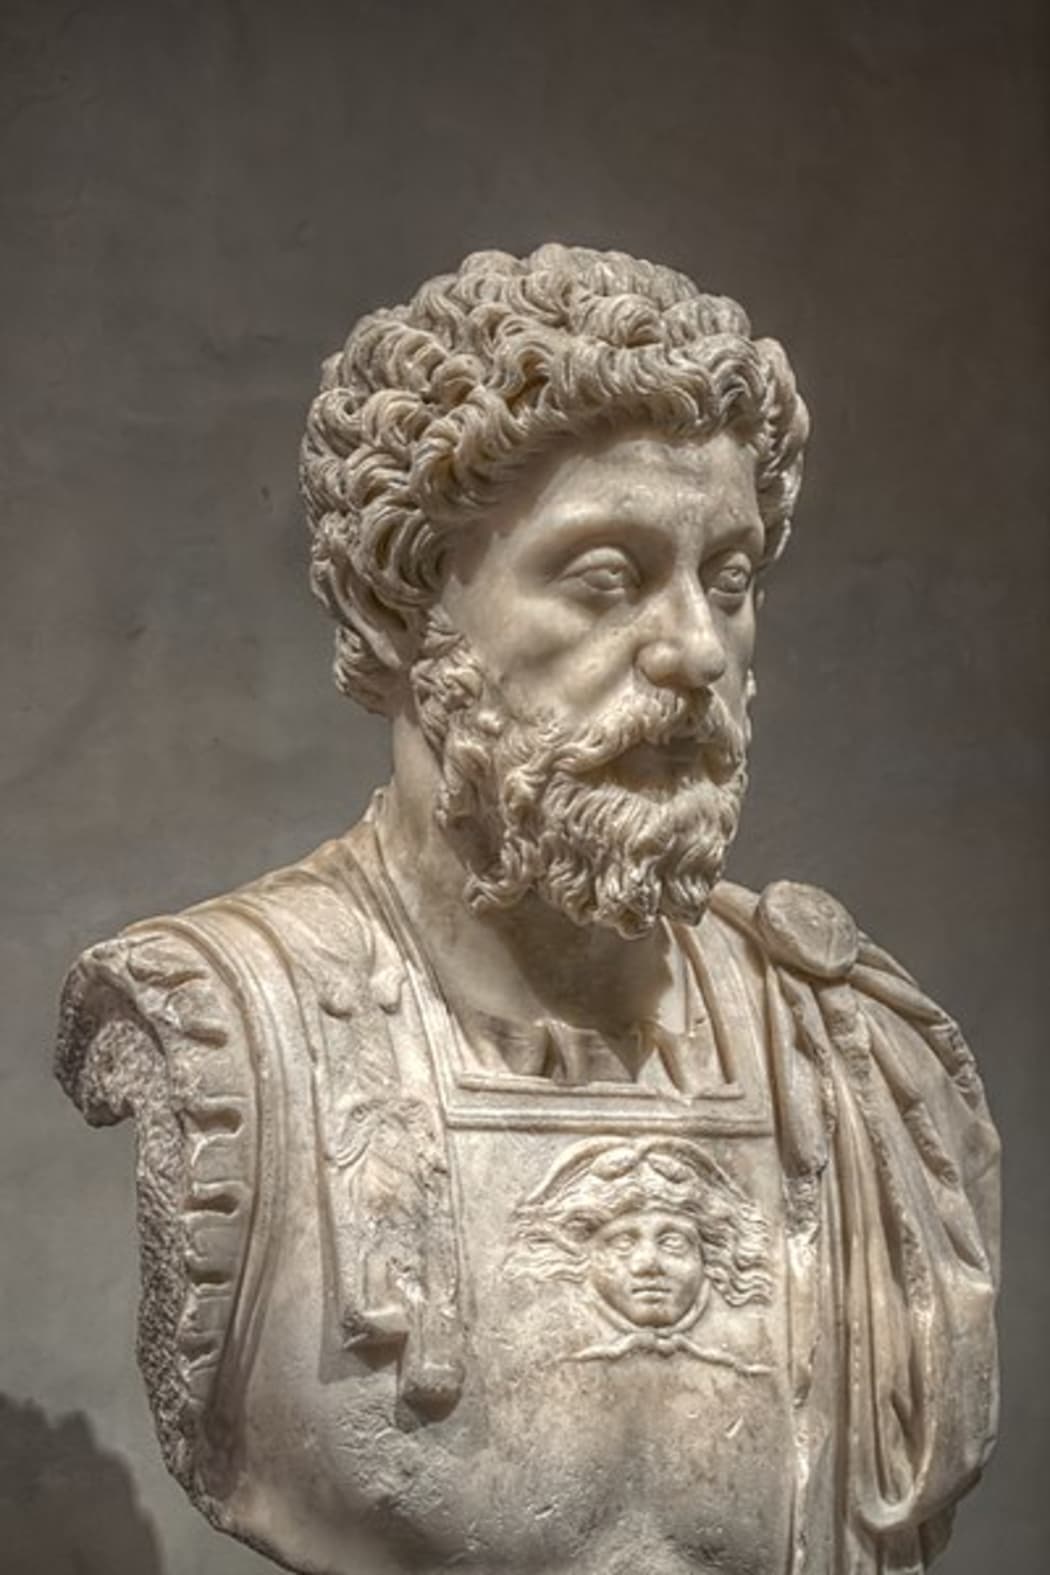 Roman Emperor Marcus Aurelius is one of history's most well-known stoics.